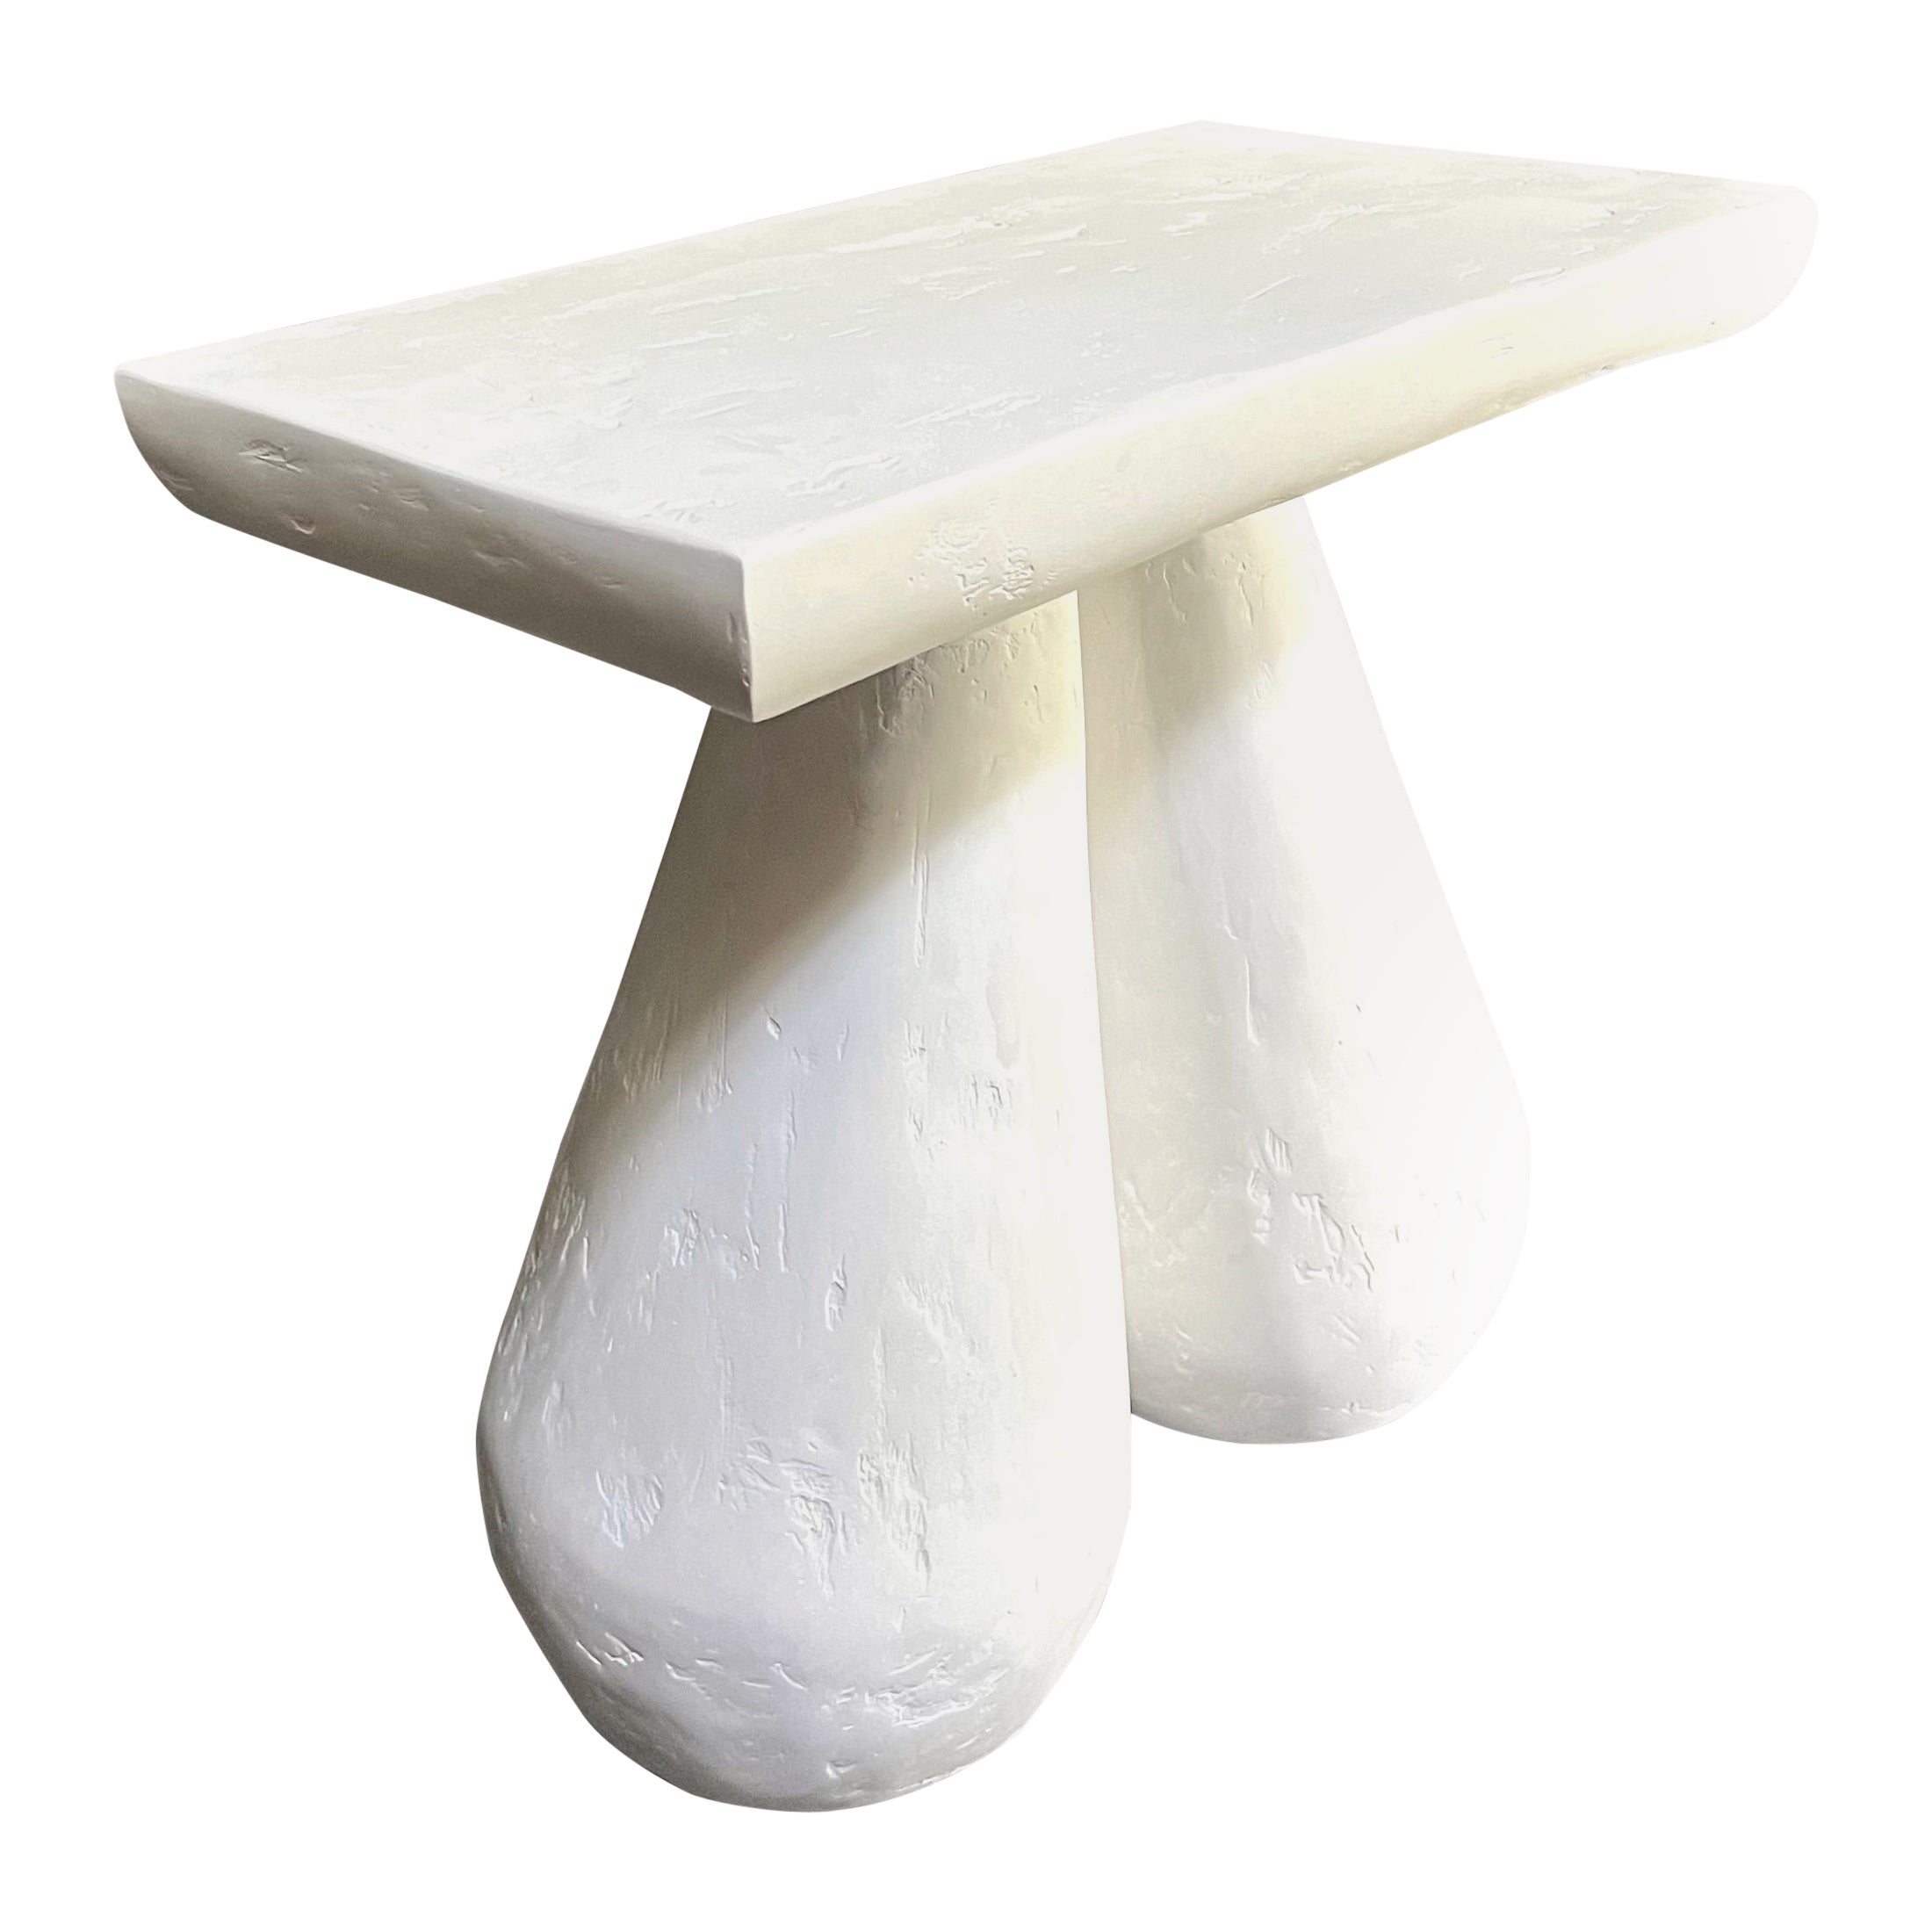 American Erika Mini Table - Modern Hand Crafted Plaster Table by Artist Gabriel Anderson